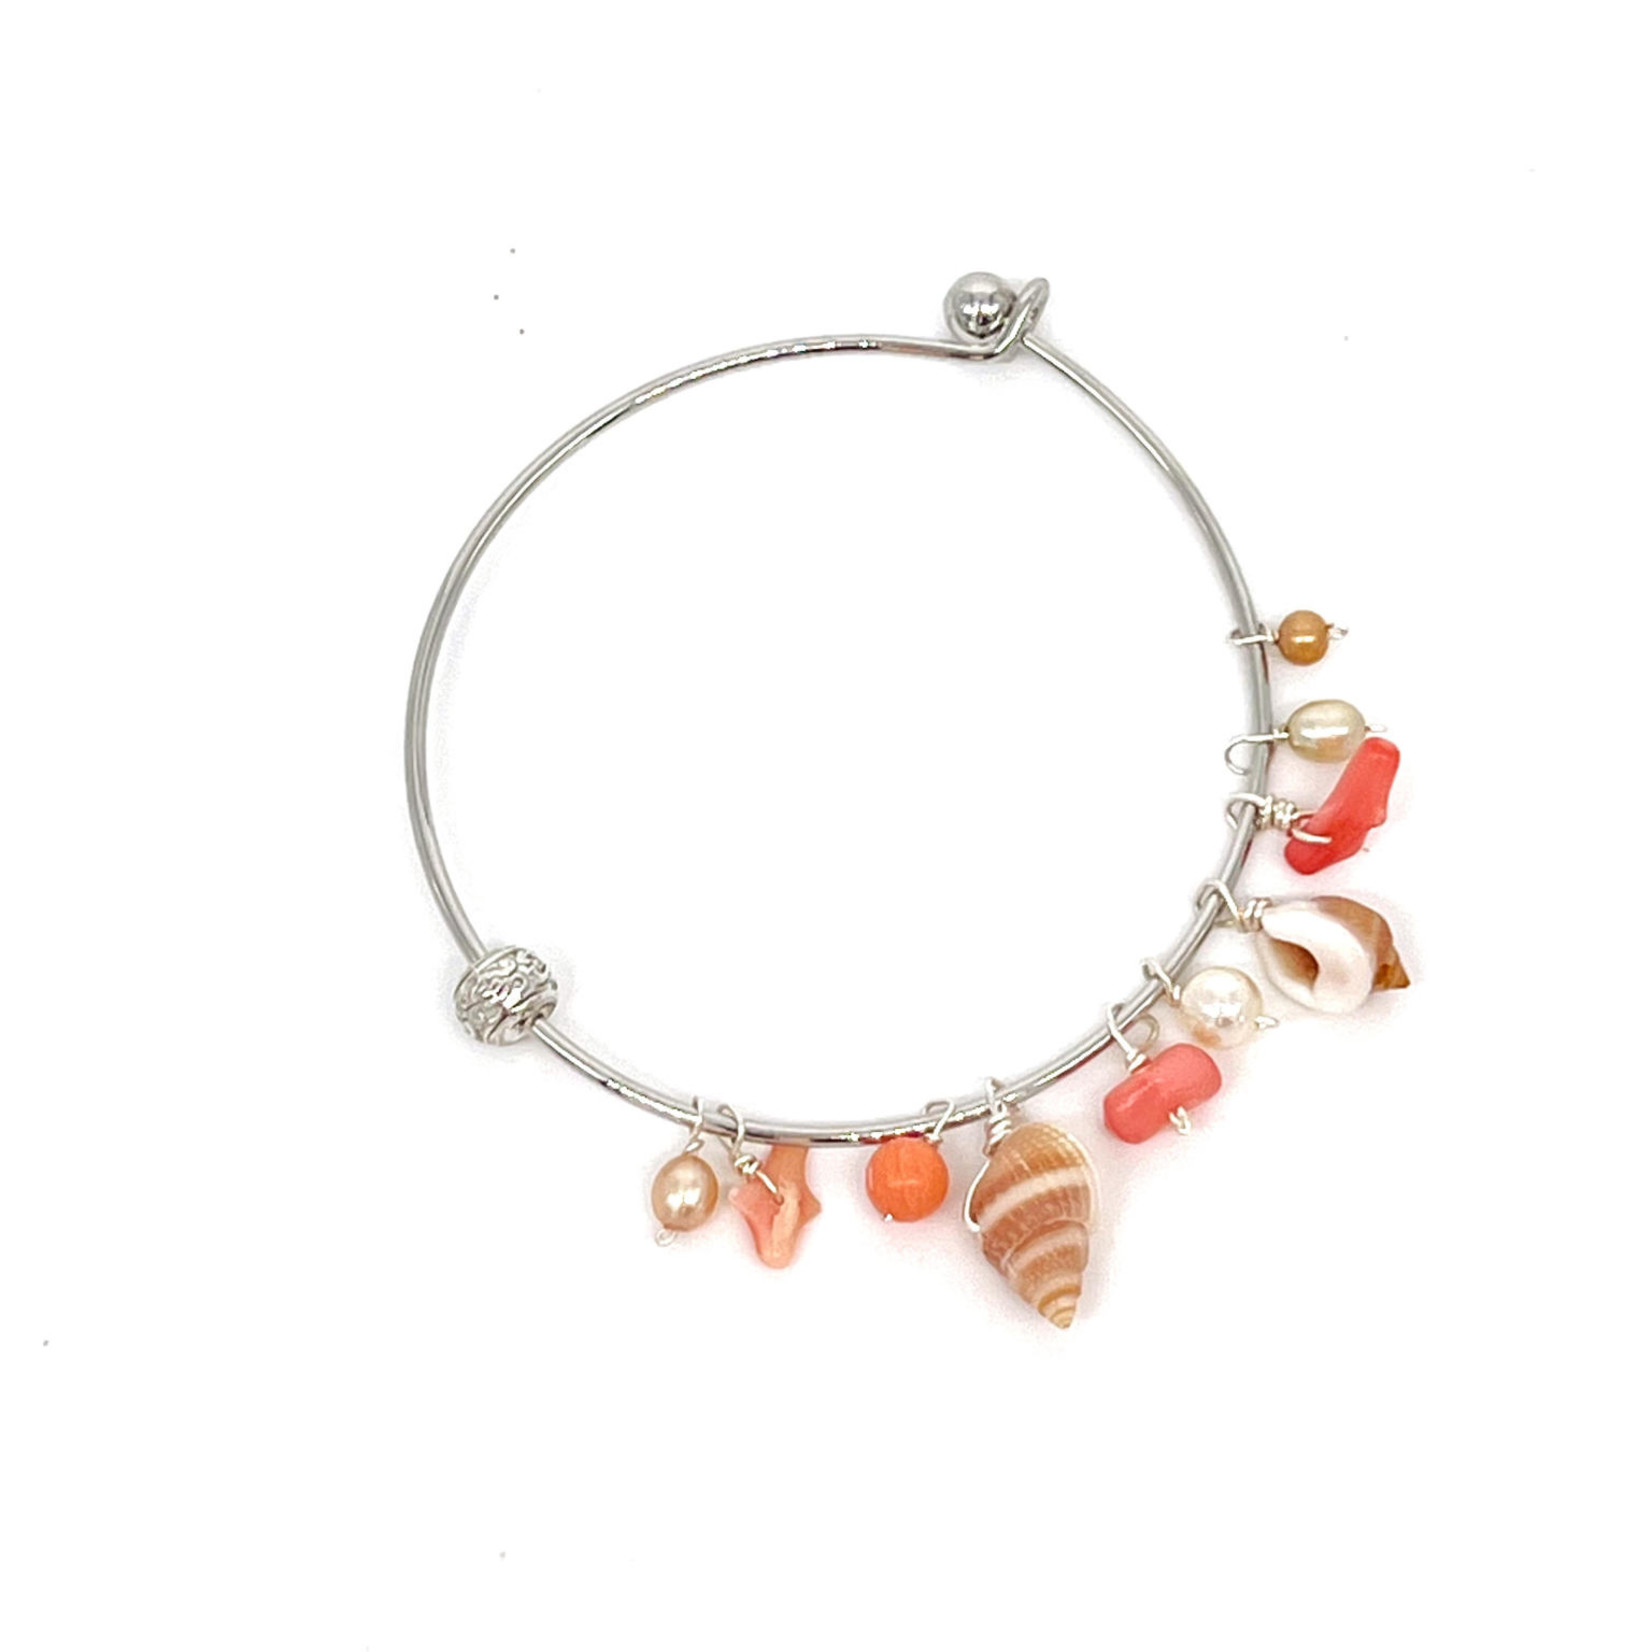 Beachcomber Bangle Bracelet Coral with Shell Small